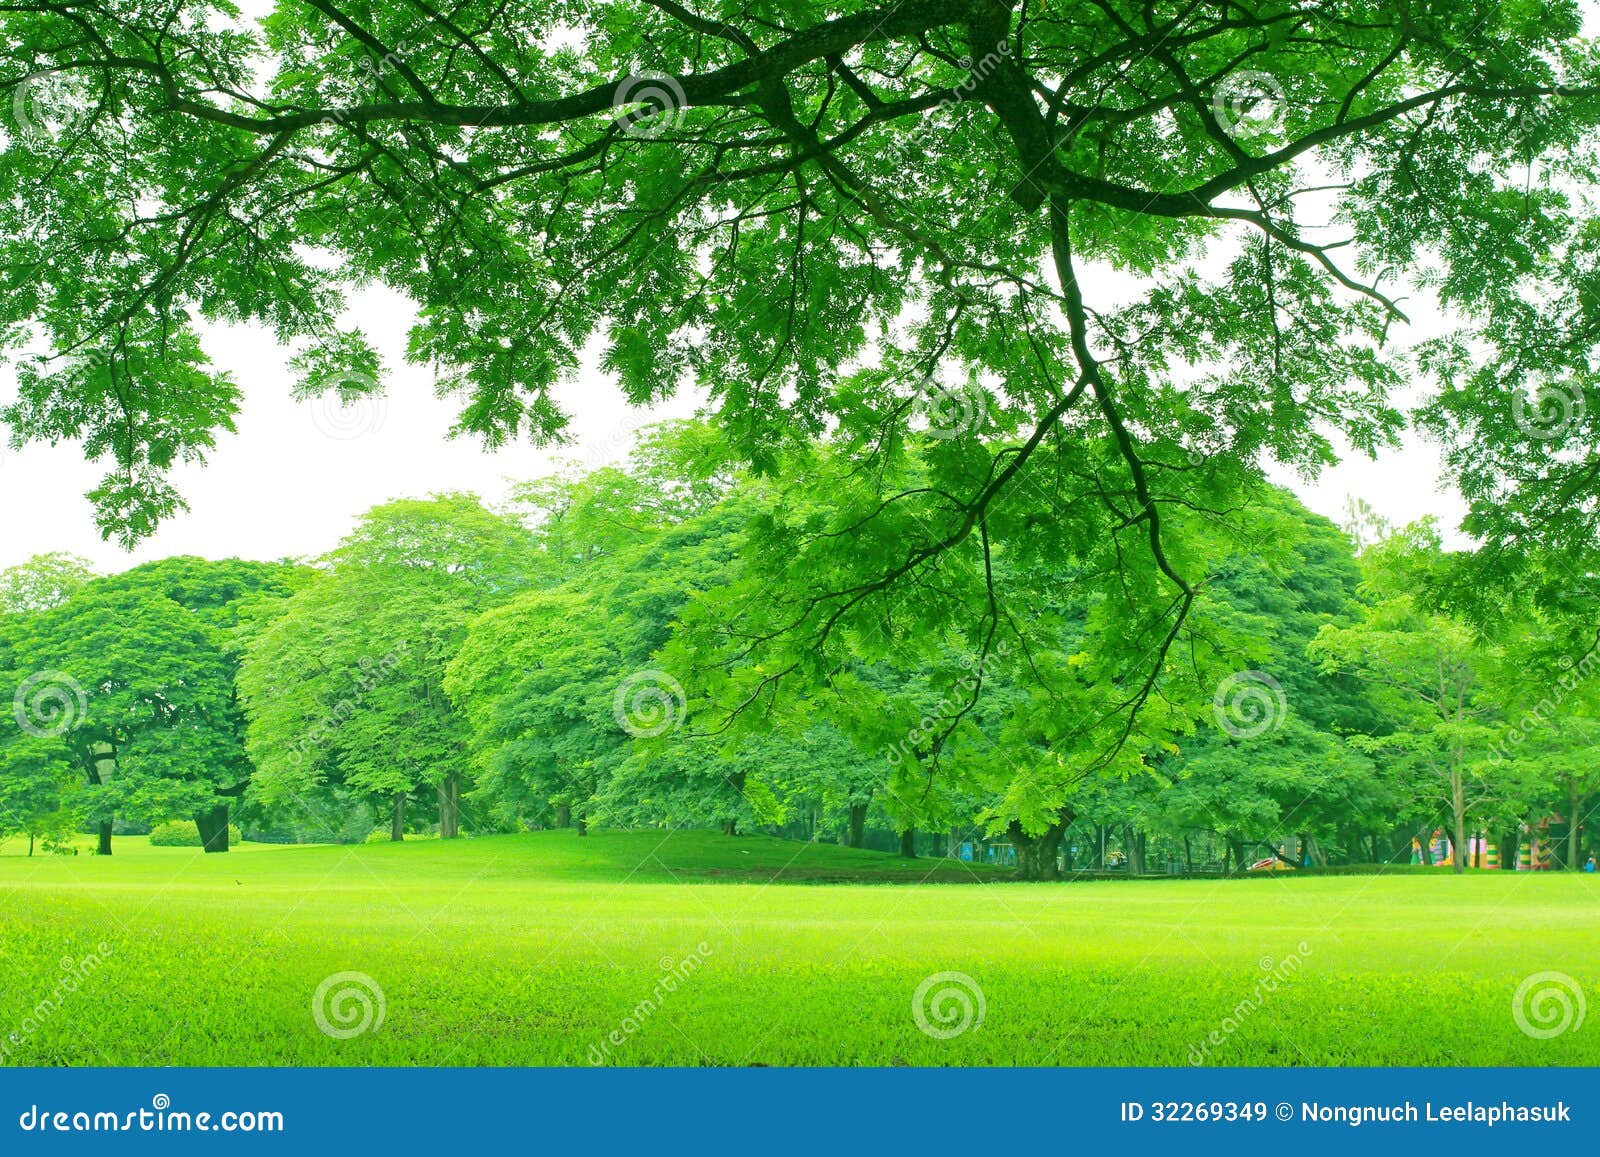 Background with Green Trees in Park Stock Image - Image of leaf, outdoor:  32269349